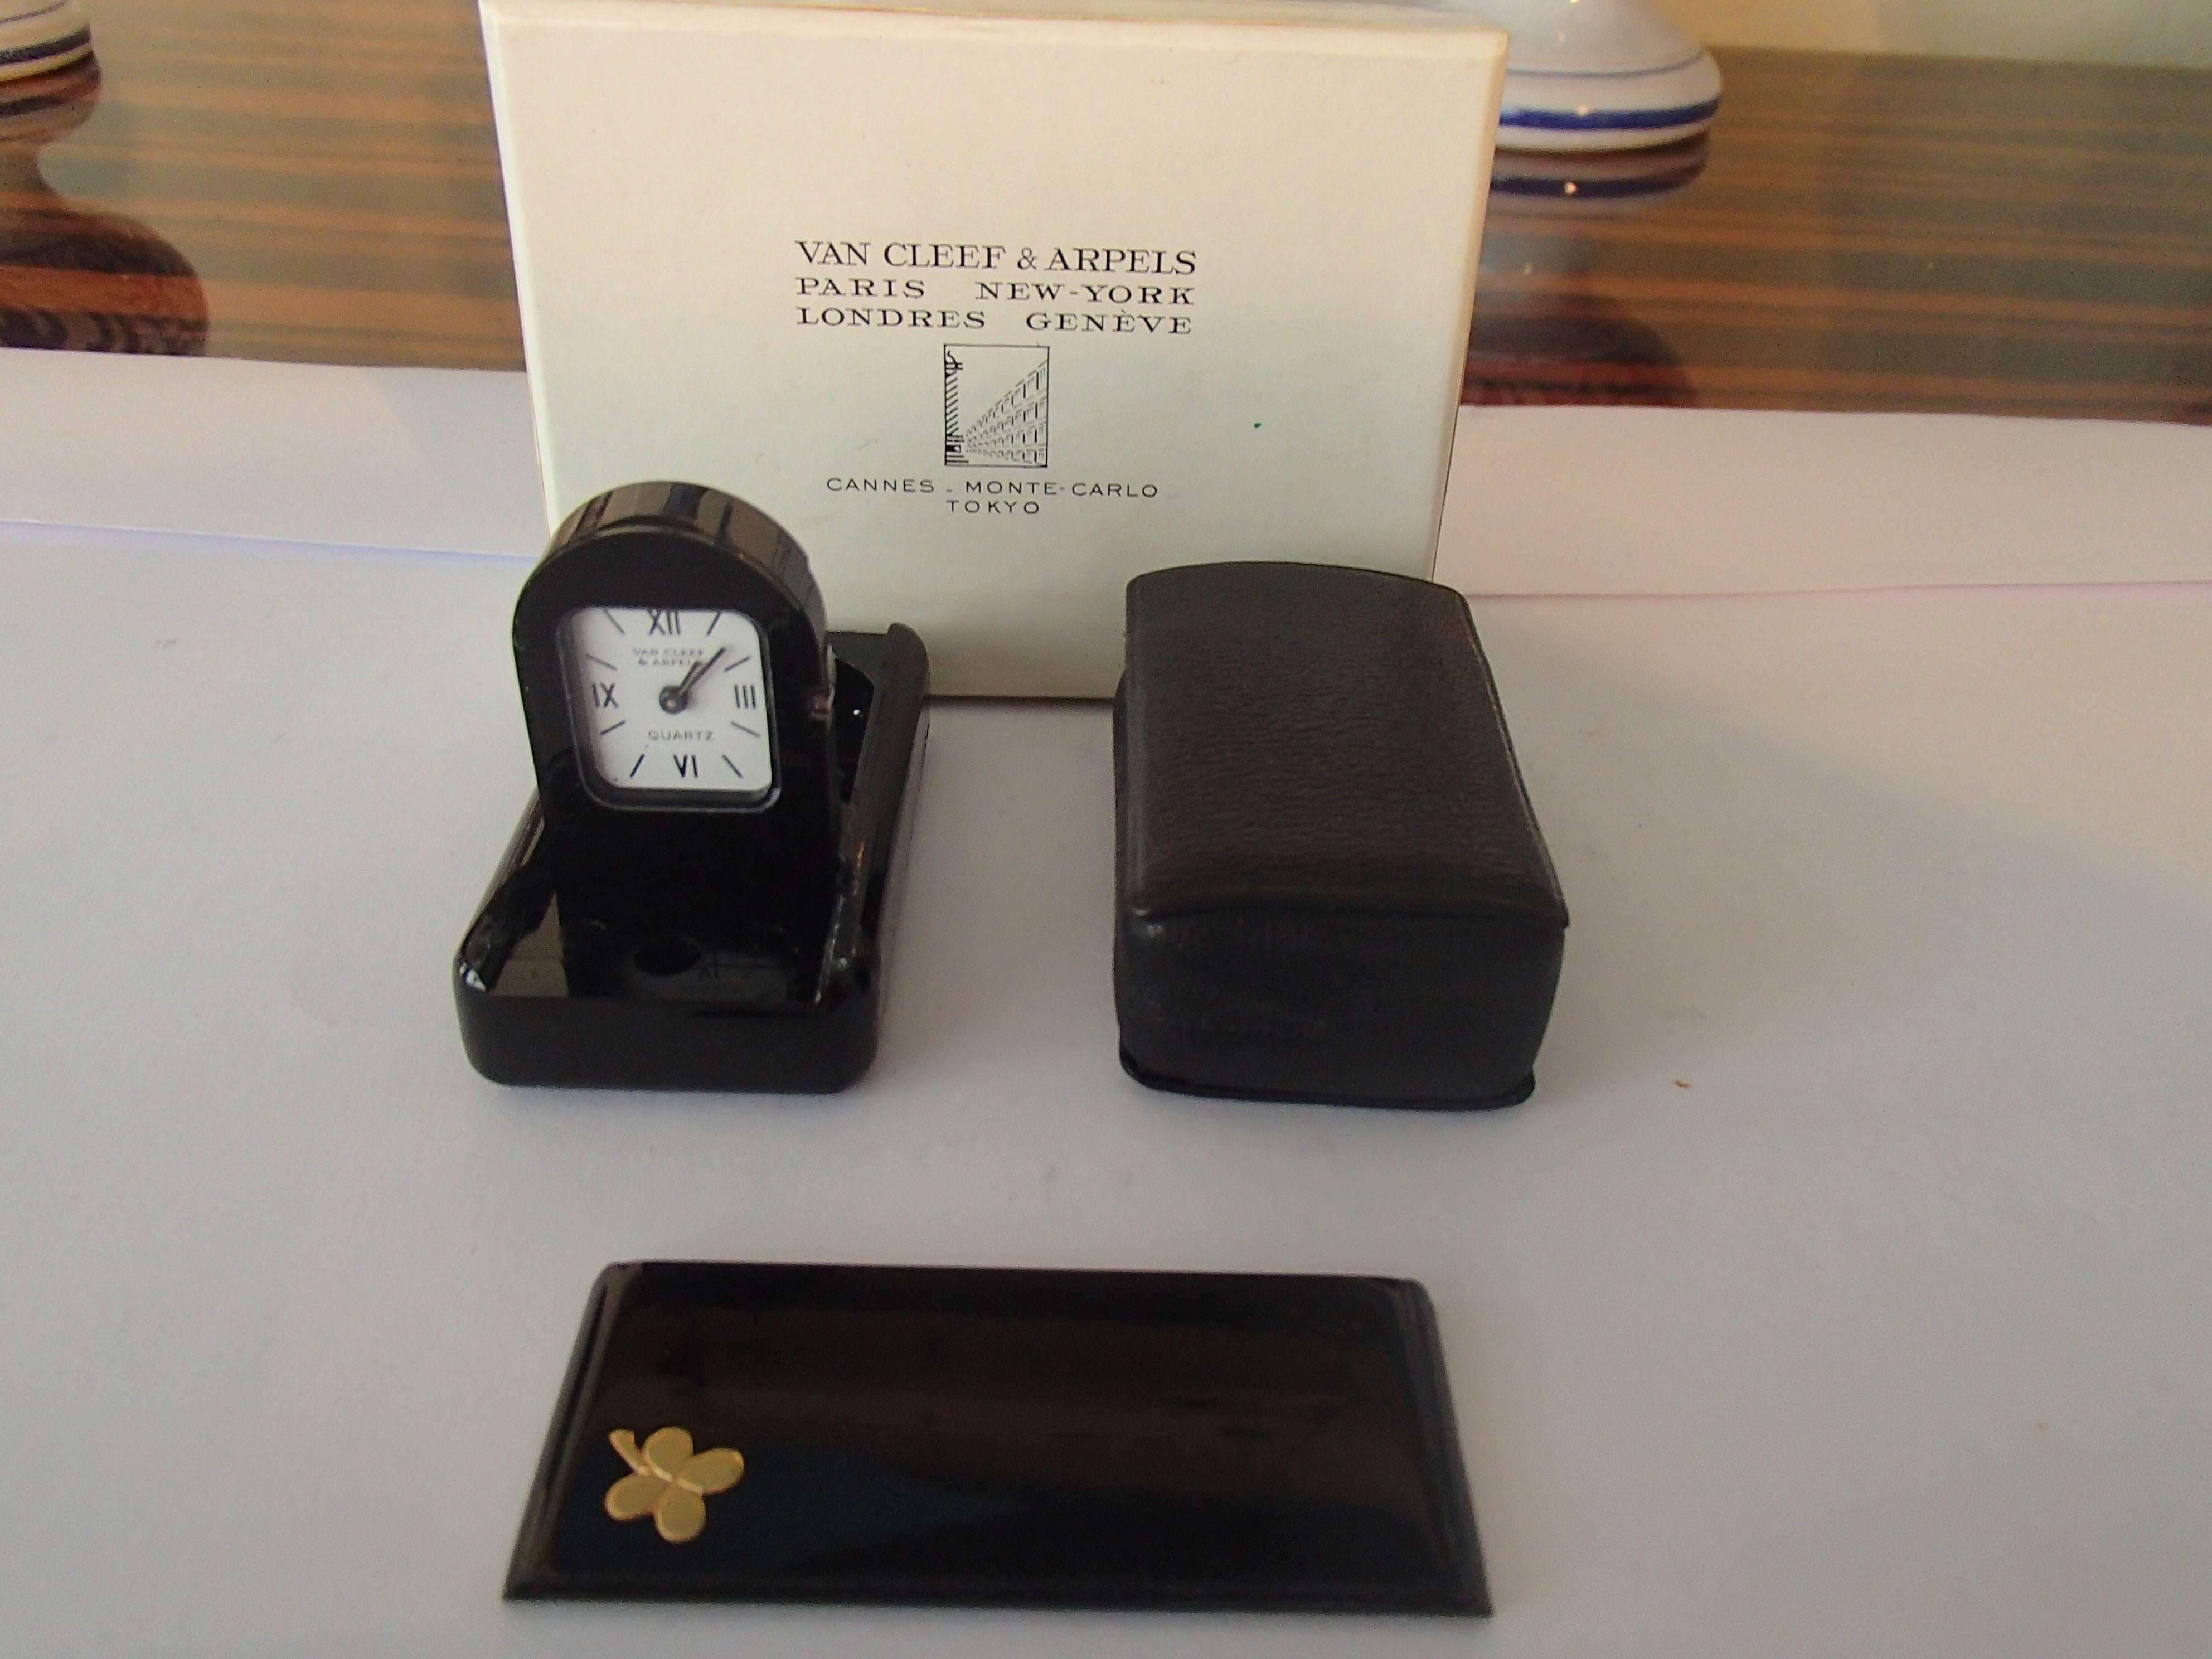 Acrylic Modern Travelling Clock by Van Cleef & Arpels Foldable in Case and Original Box